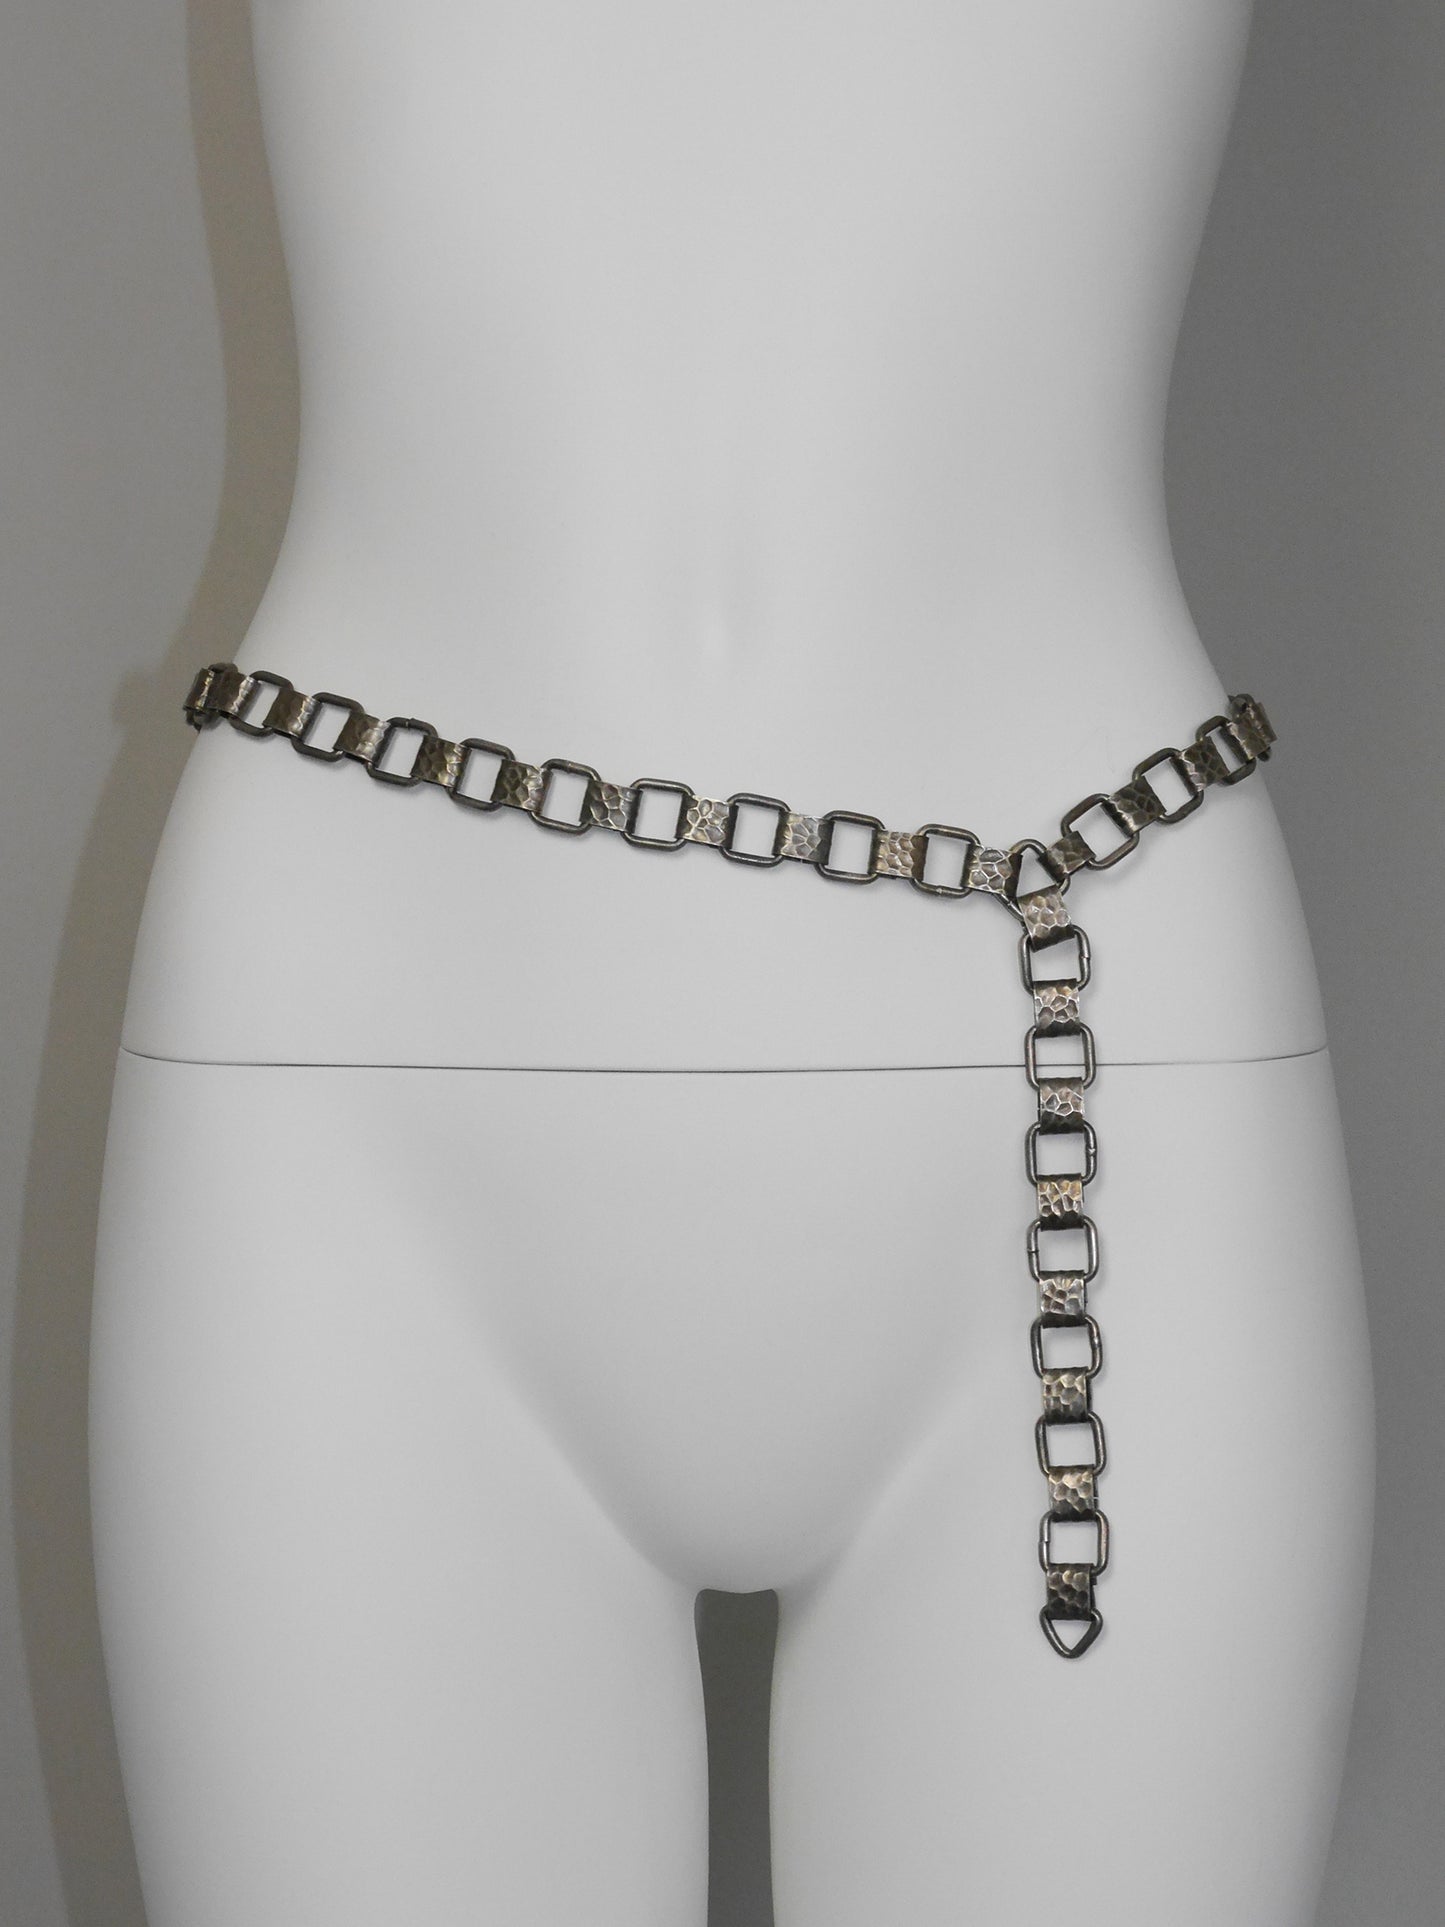 YVES SAINT LAURENT by Roger Scemama 1960s 1970s Vintage Chain Belt or Necklace